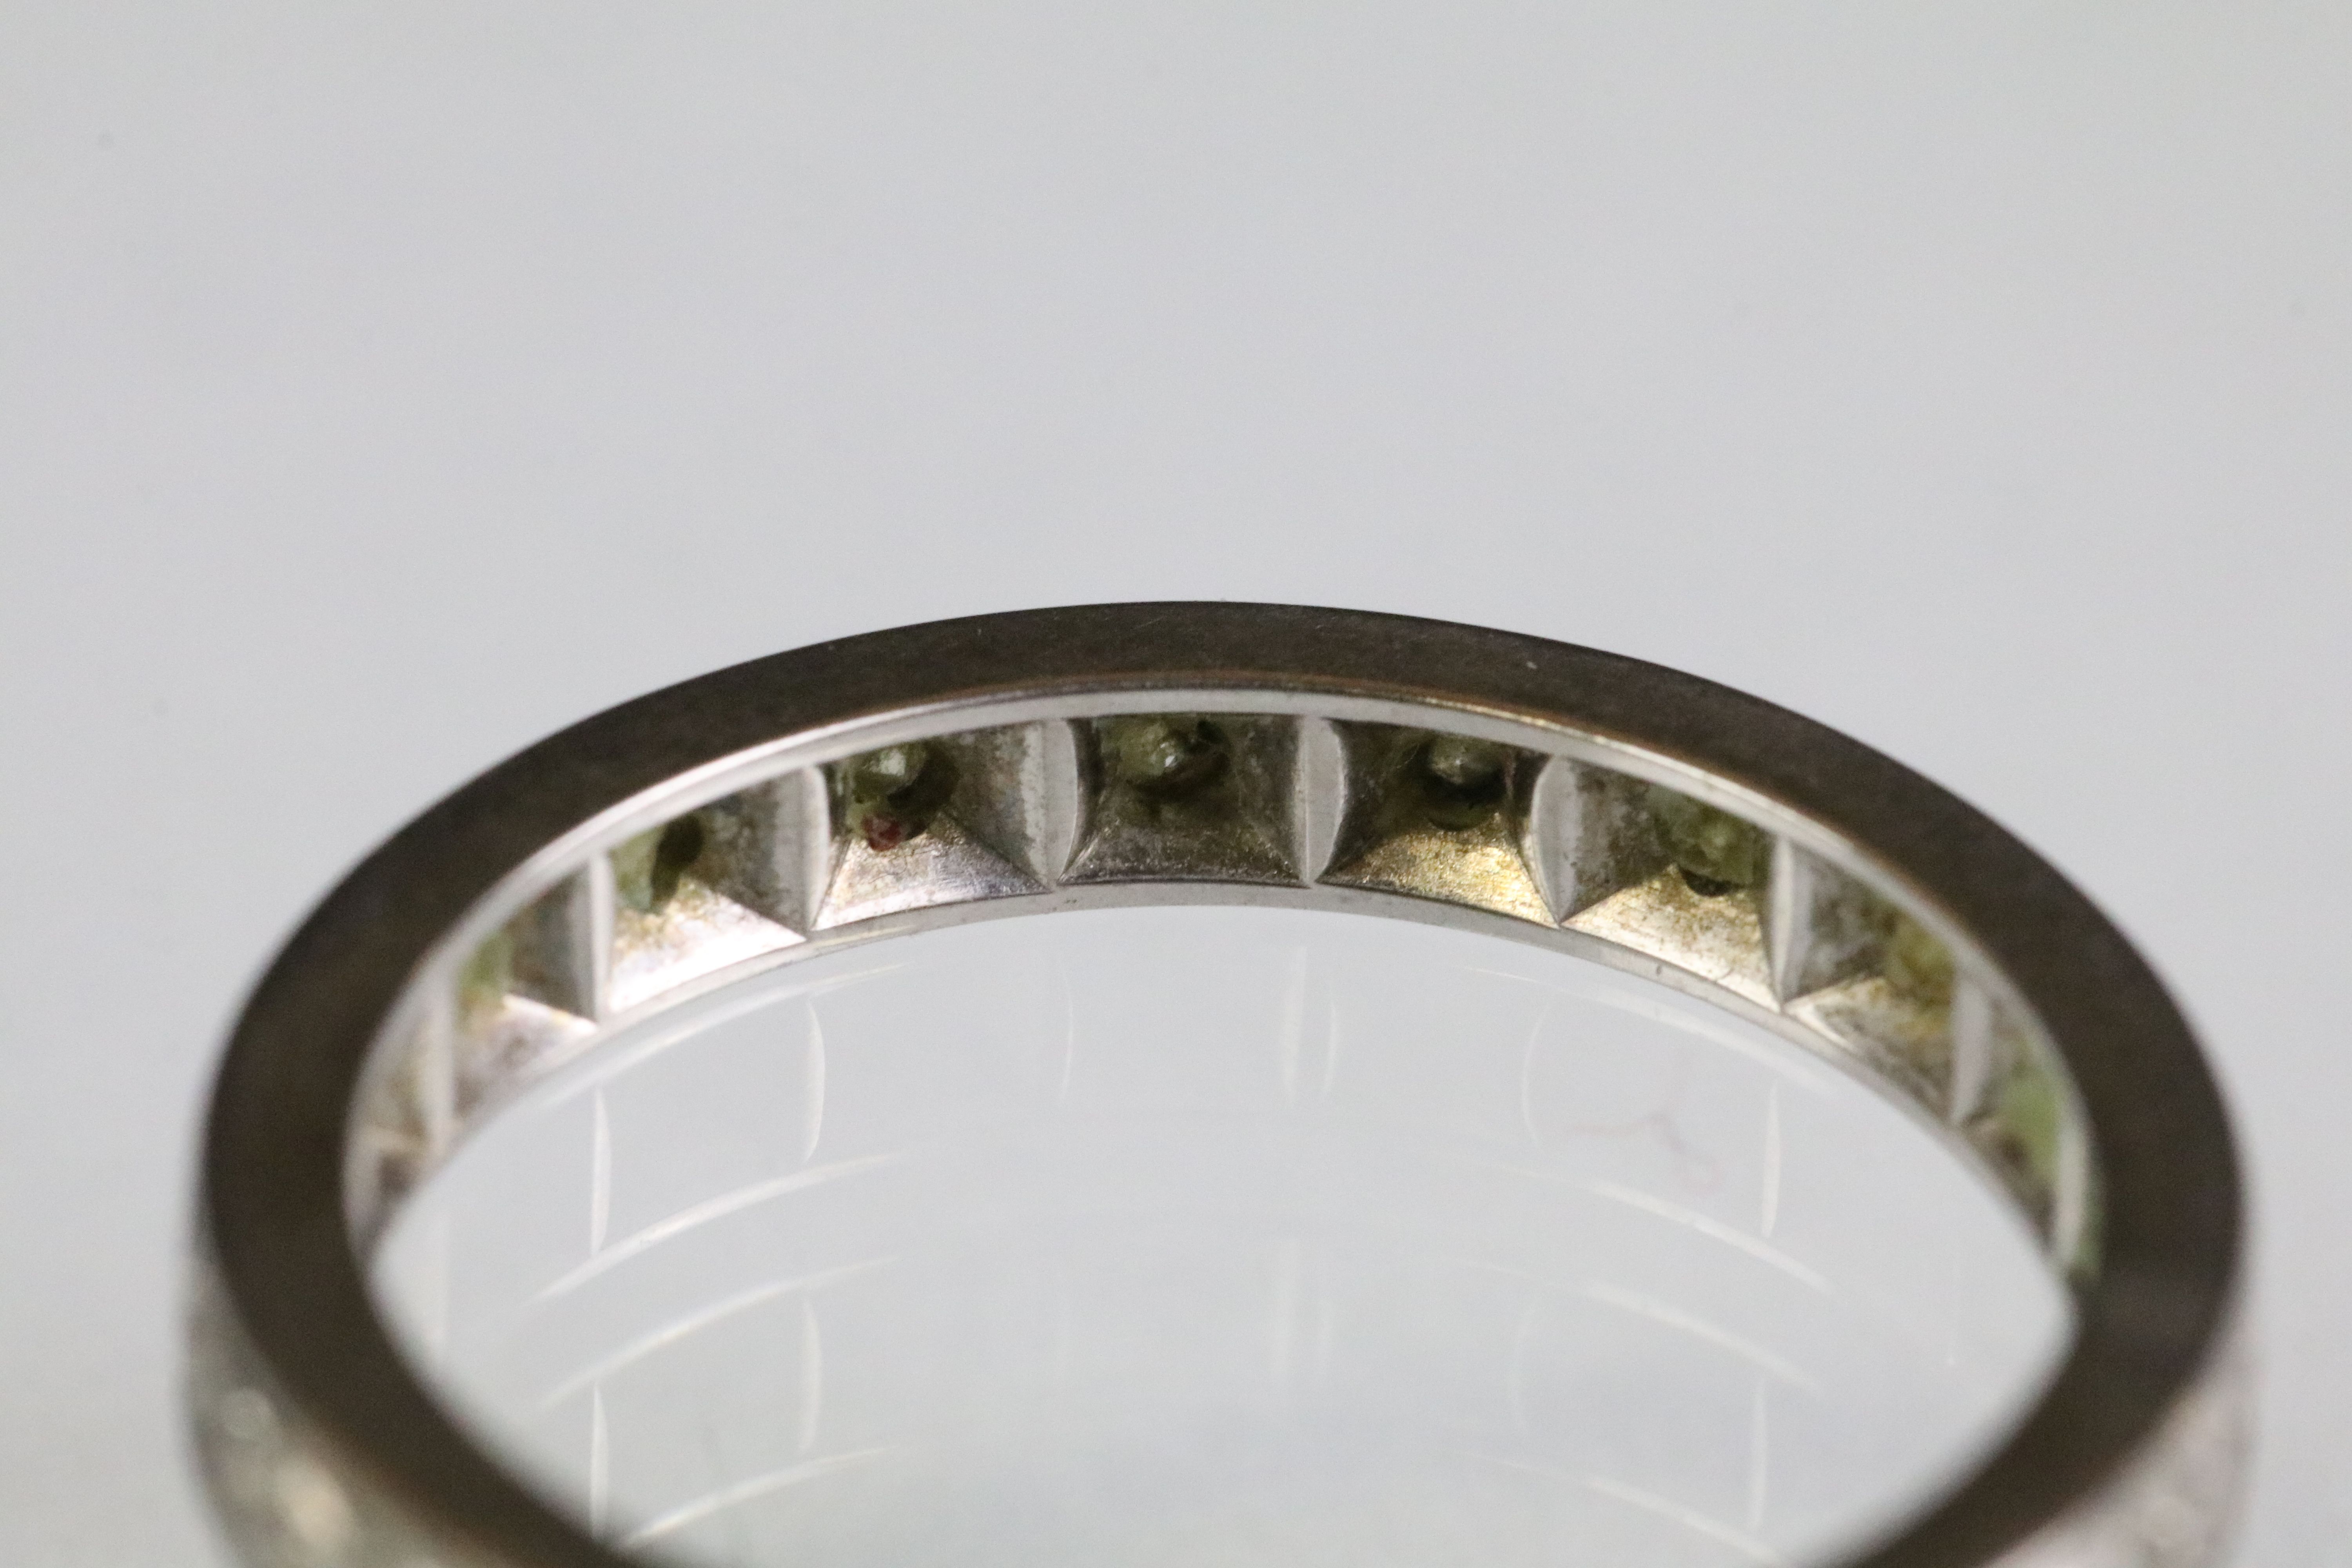 Diamond eternity ring being set throughout with round single cut diamonds. White metal unmarked, - Image 3 of 3